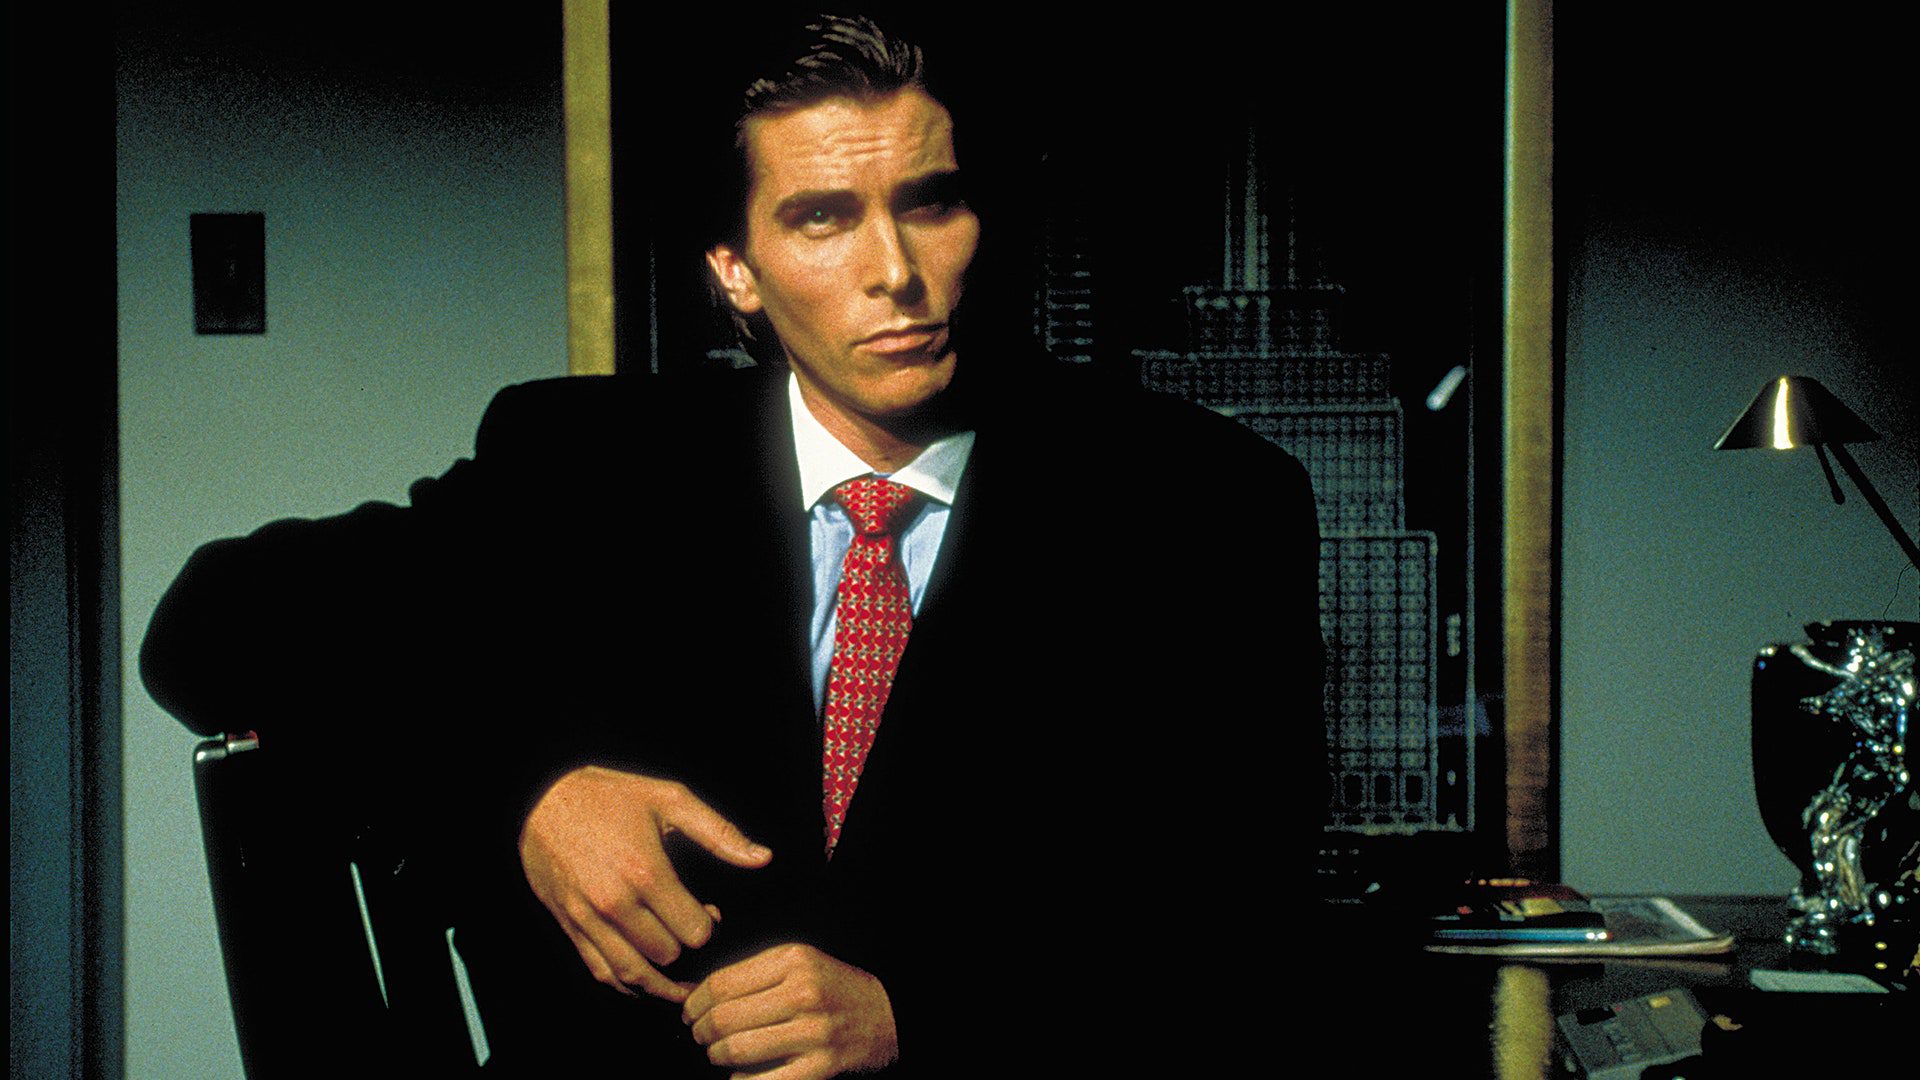 Dressed to kill: American Psycho's style legacy 30 years on